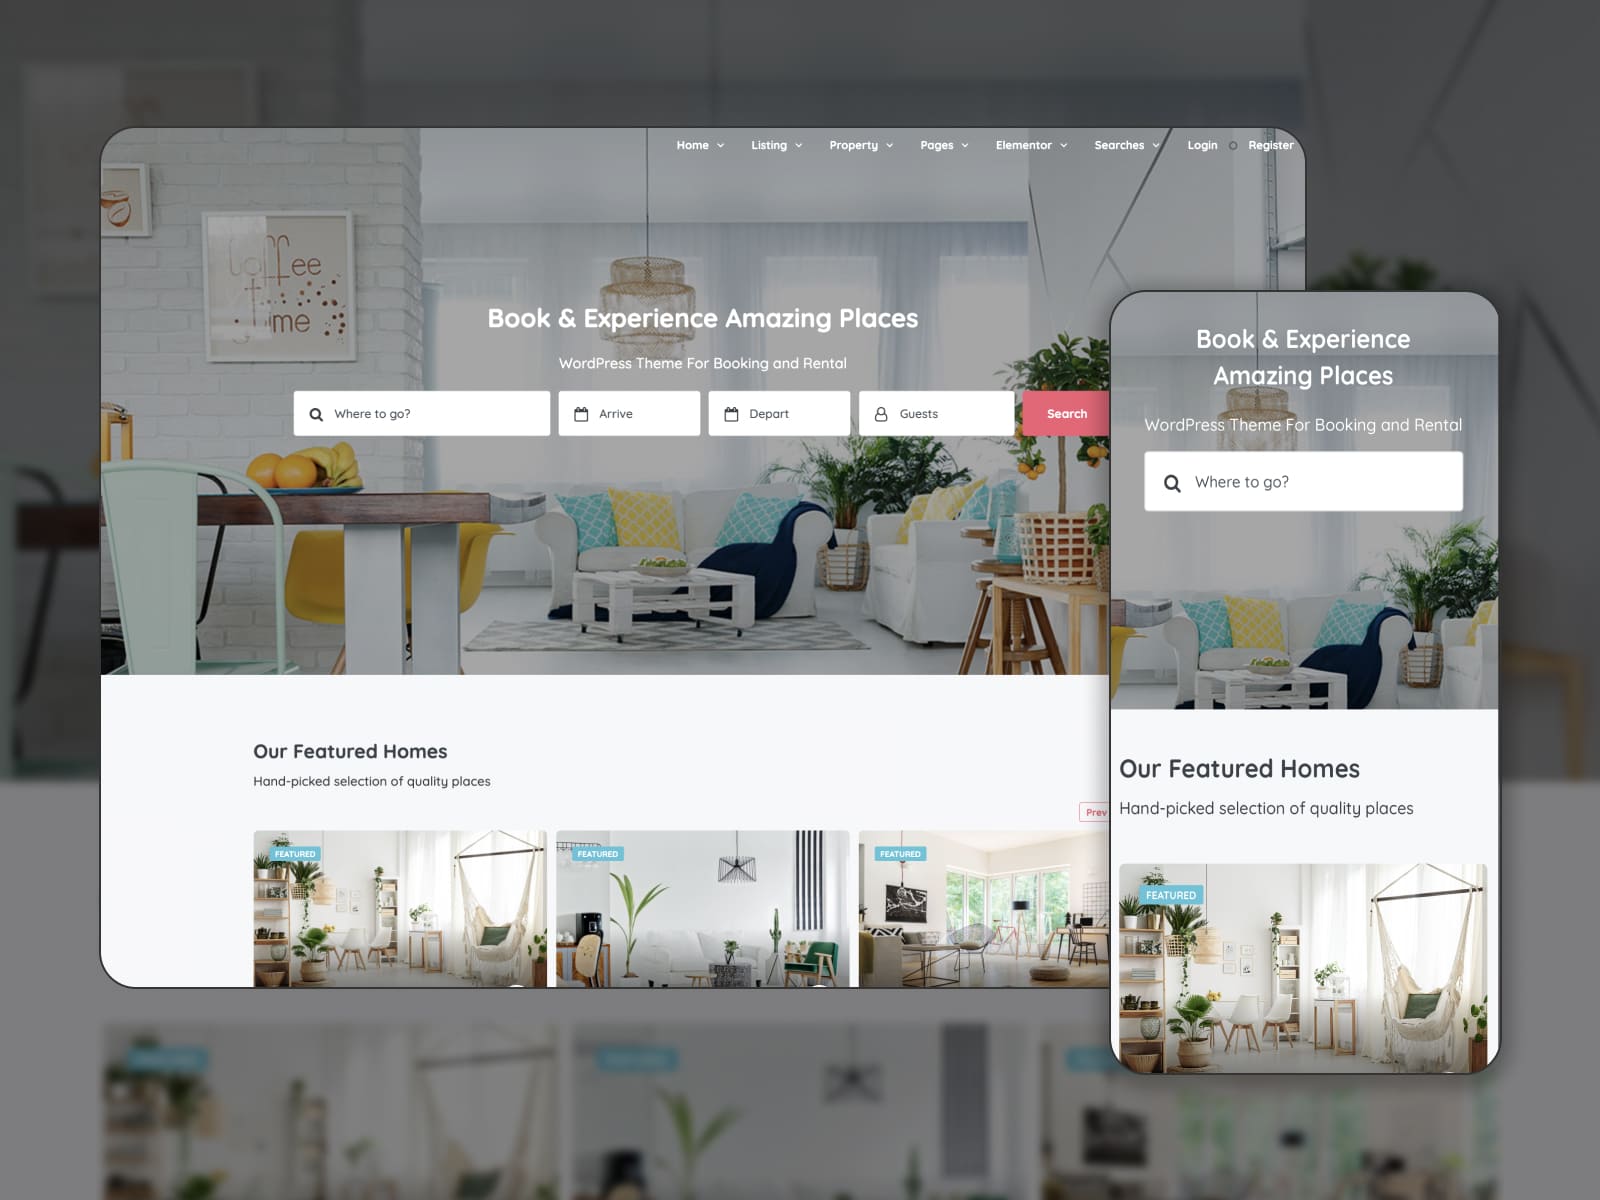 The Homey theme shown with a design clone to Airbnb.